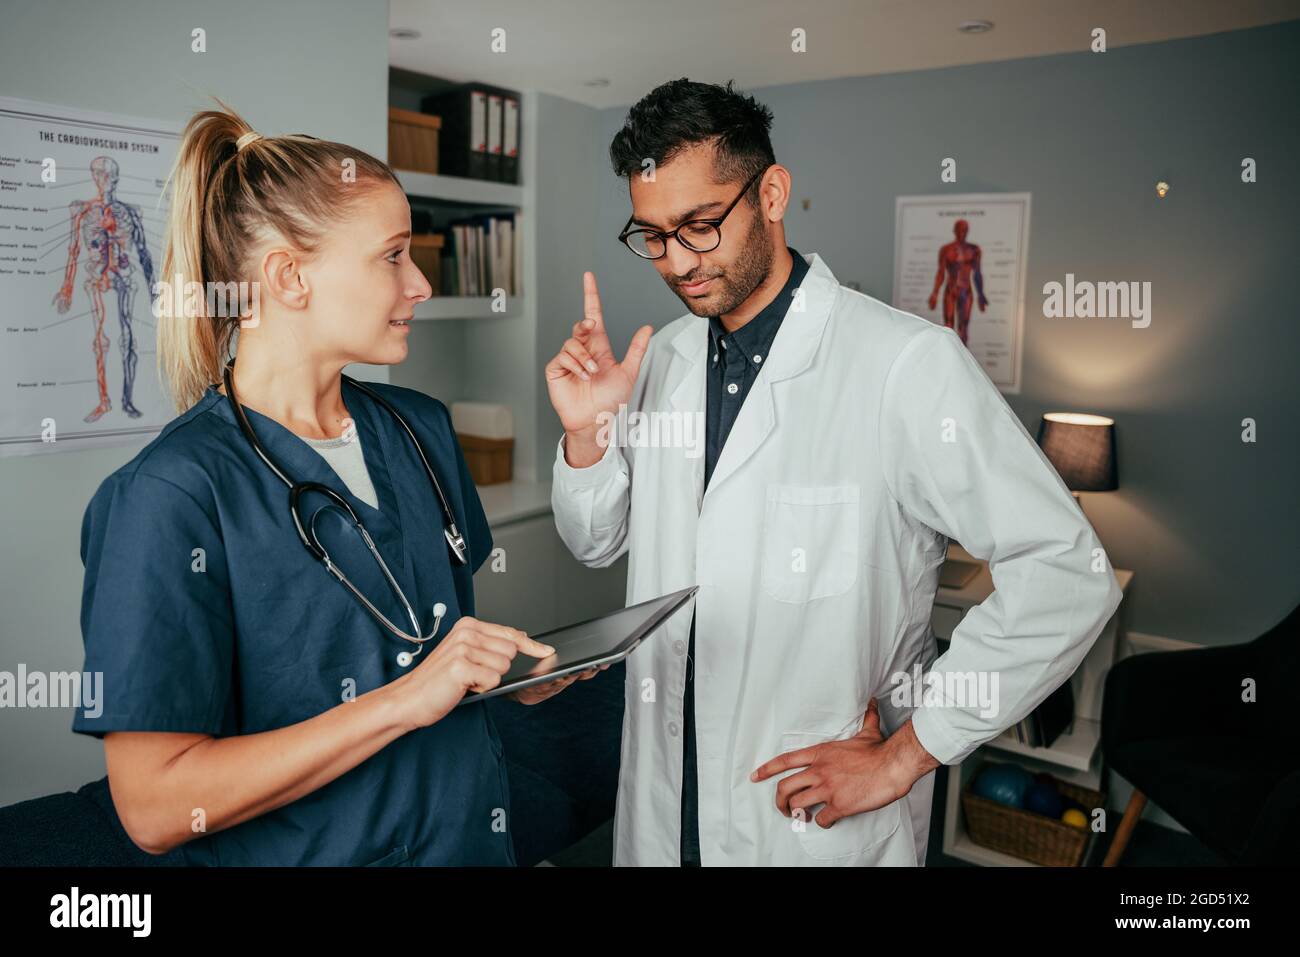 Caucasian female nurse intern chatting to male doctor standing in office holding digital tablet Stock Photo